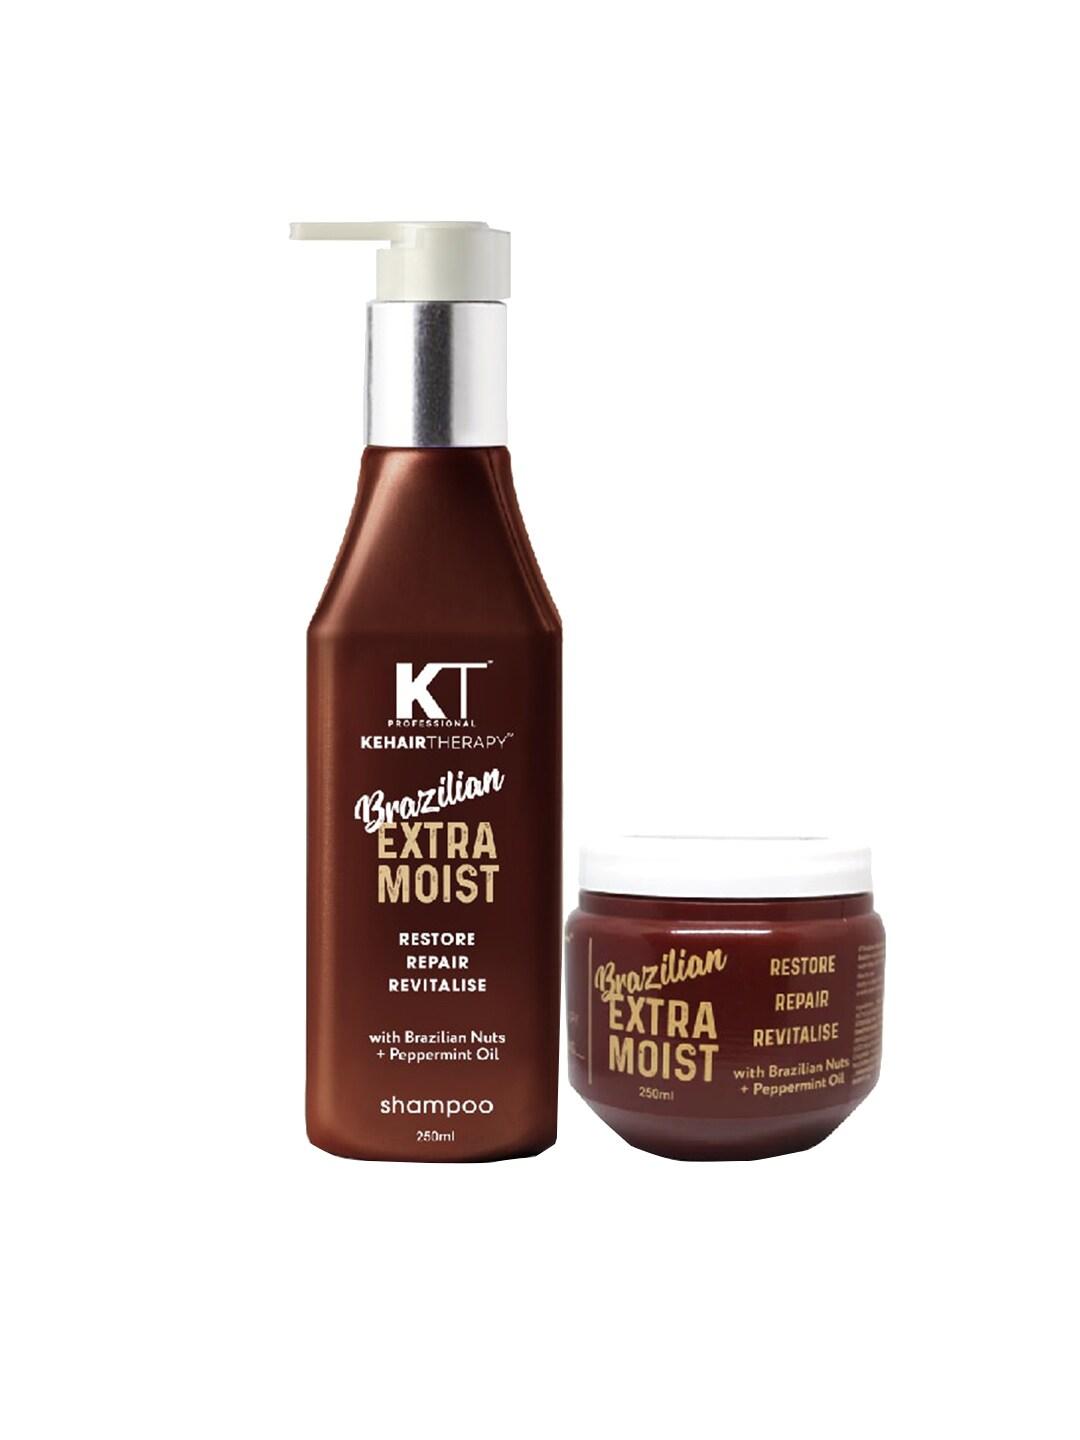 KEHAIRTHERAPY Set of Brazilian Extra Moist Shampoo & Masque with Peppermint - 250 ml each